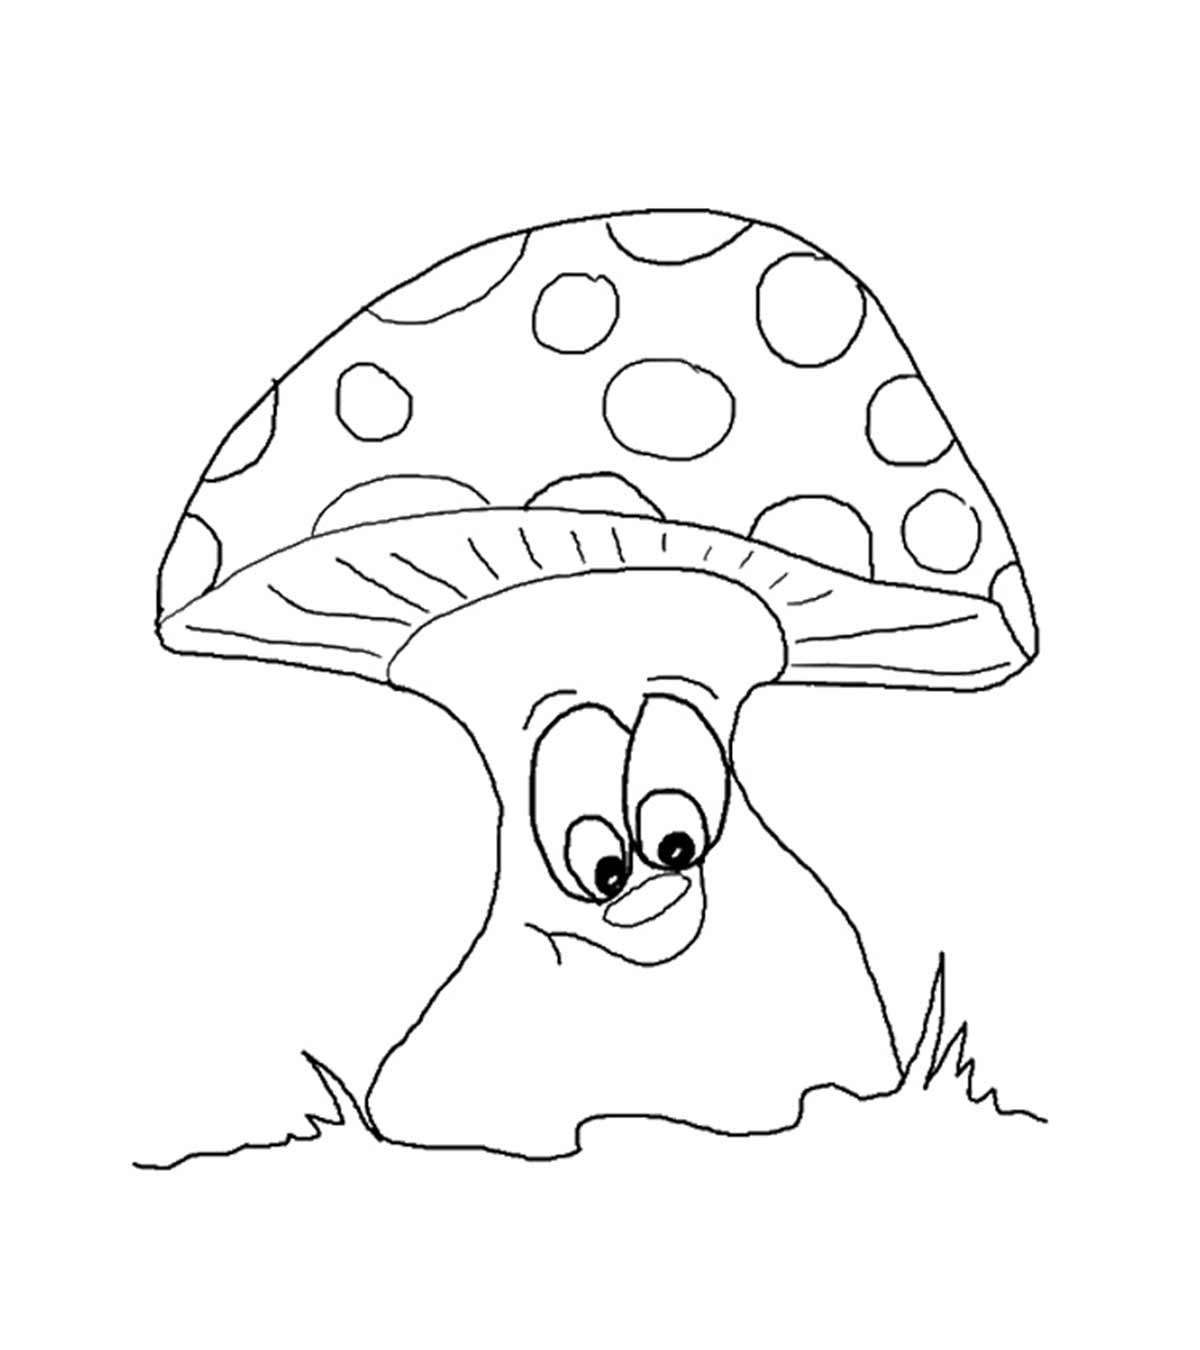 25 Best Mushroom Coloring Pages Your Toddler Will Love To Color_image